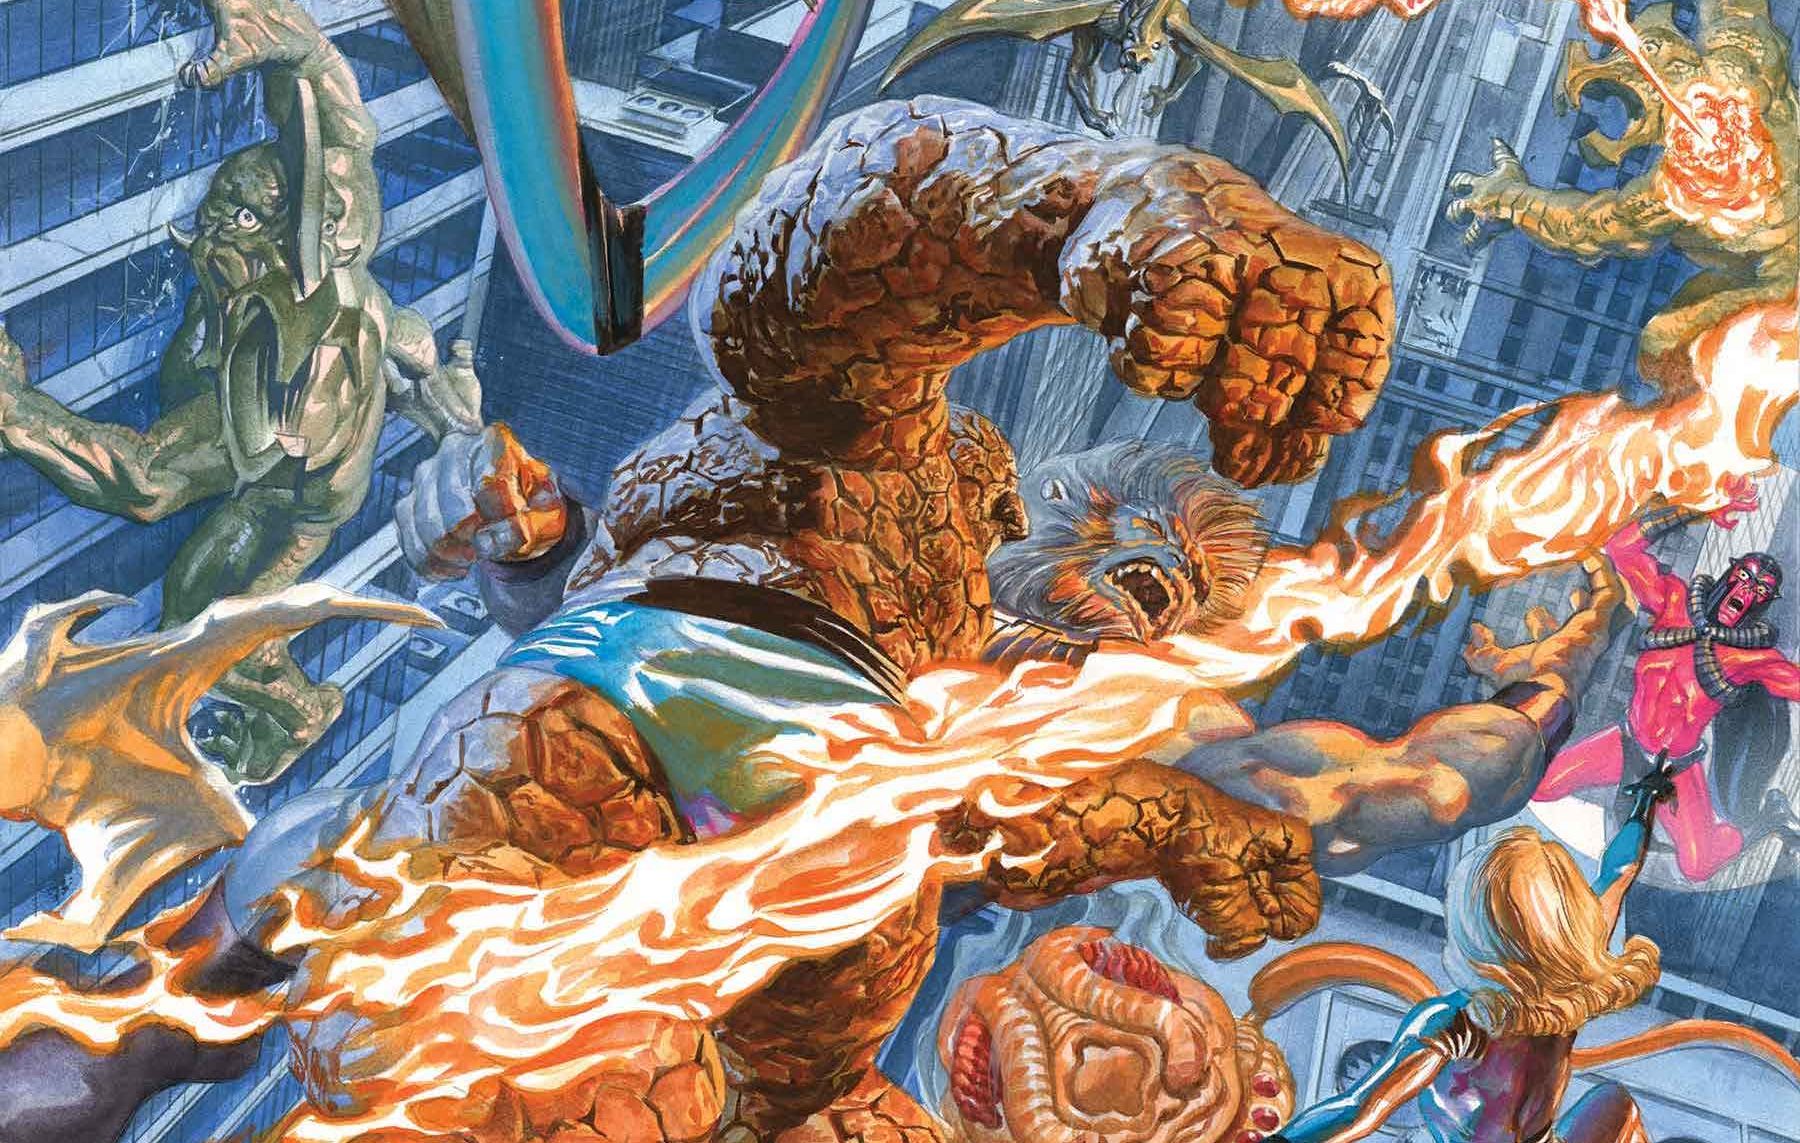 'Fantastic Four' #4 is impeccably smart with two big sci-fi ideas